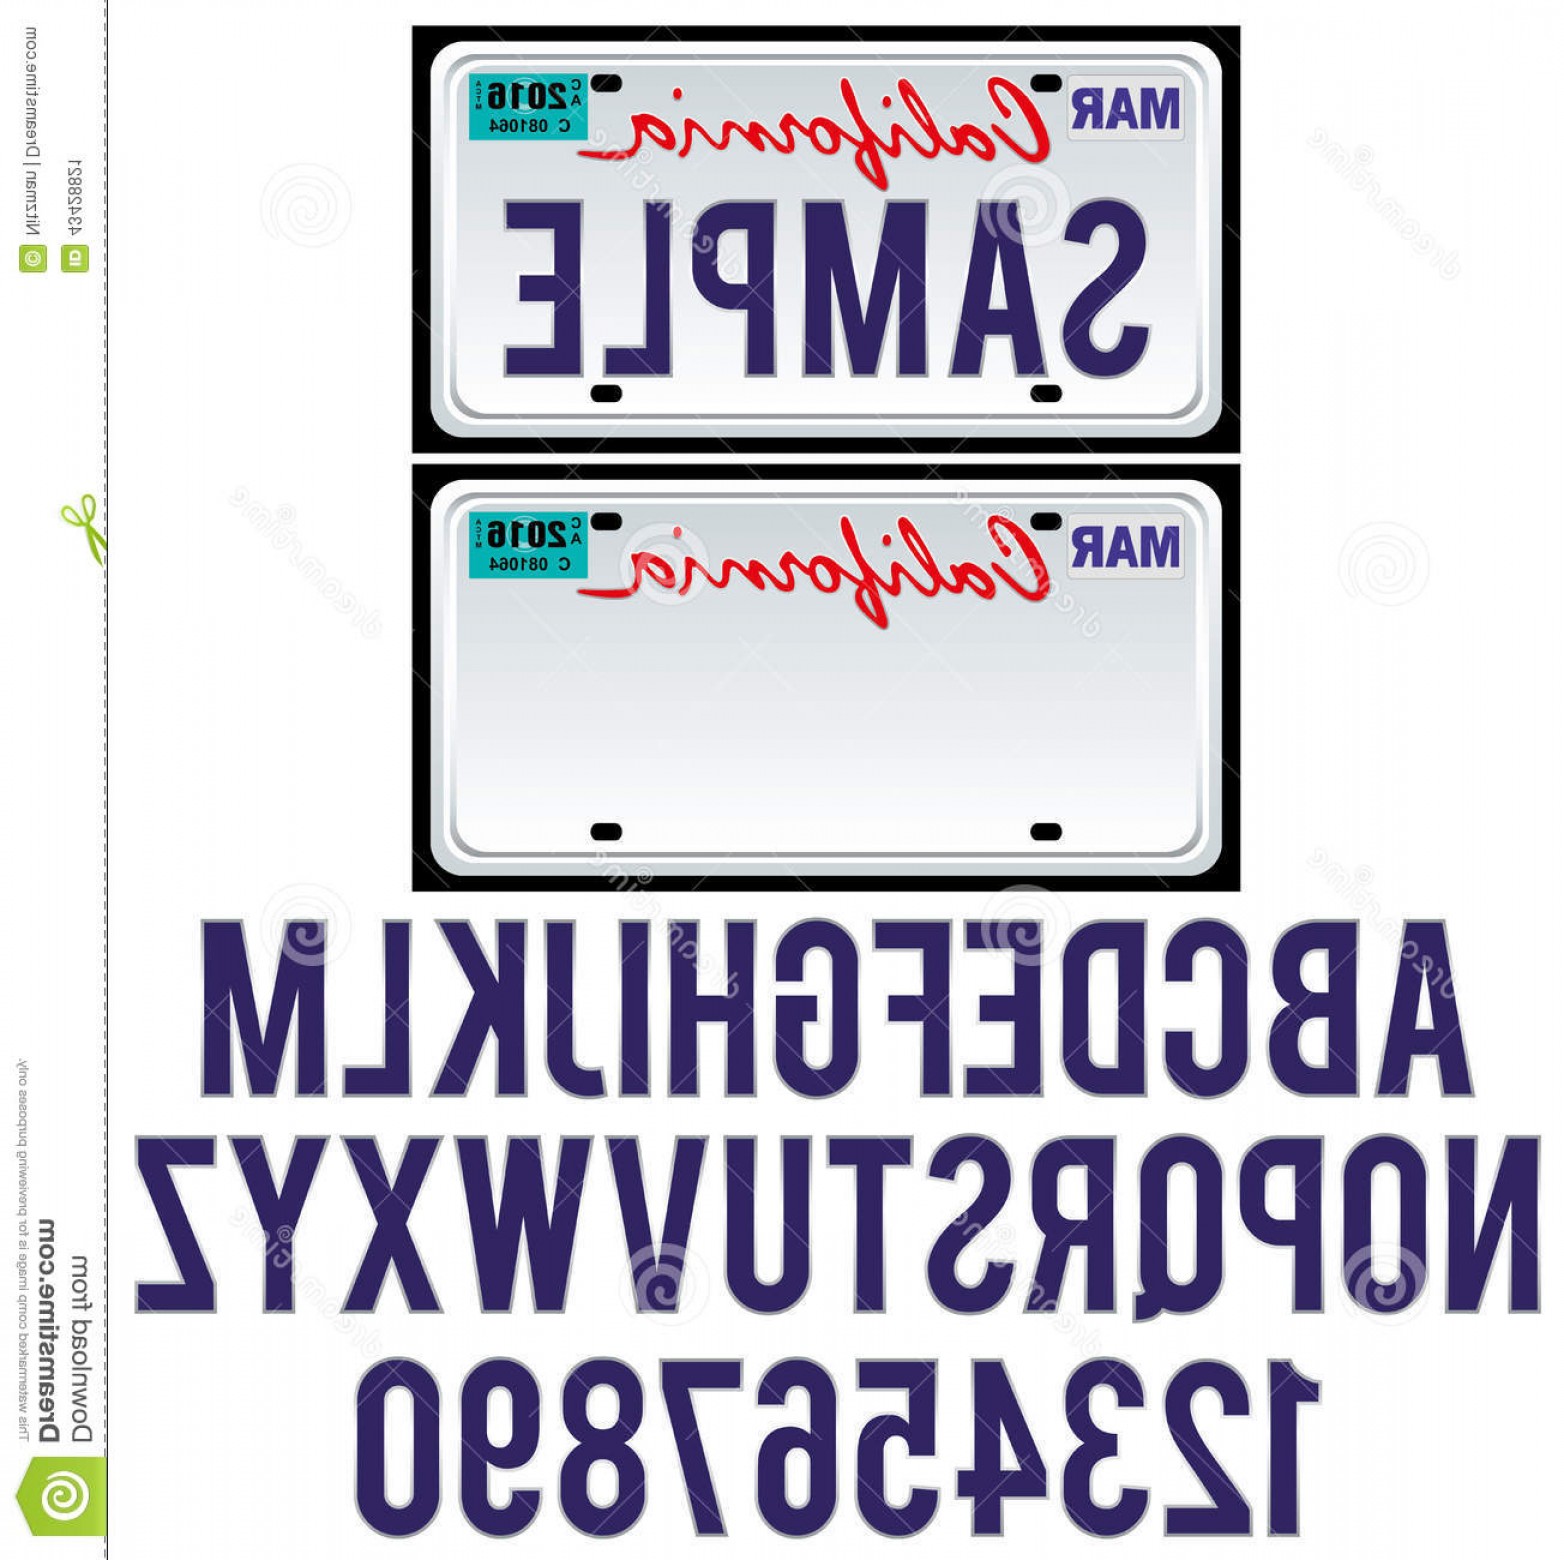 california-license-plate-vector-at-vectorified-collection-of